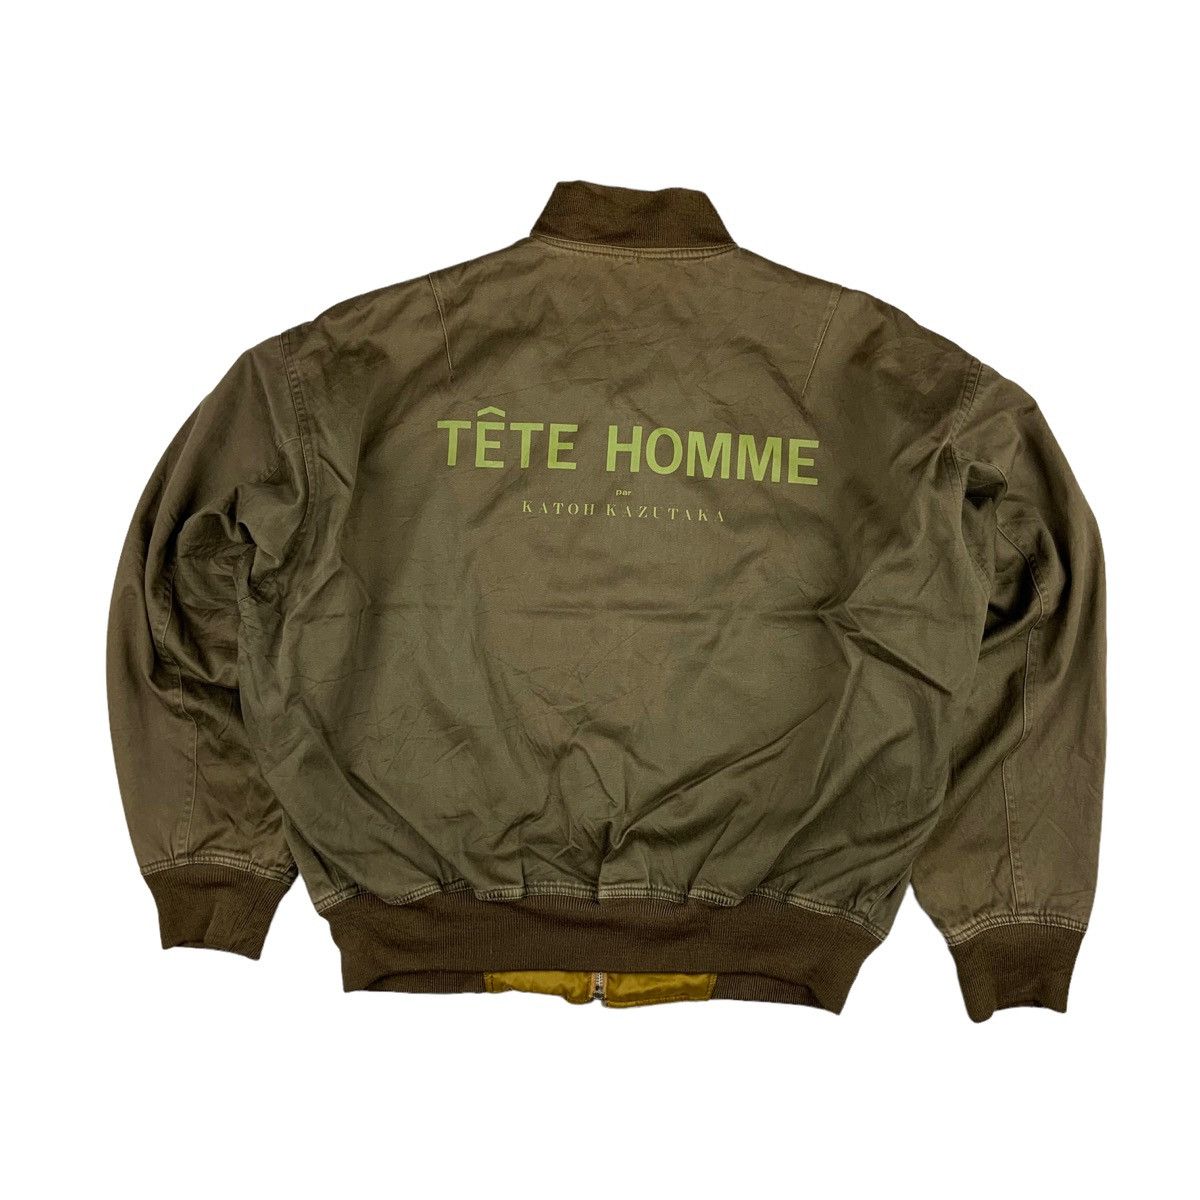 TETE HOMME テットオム スタジャン 牛皮 切替 ブルゾン